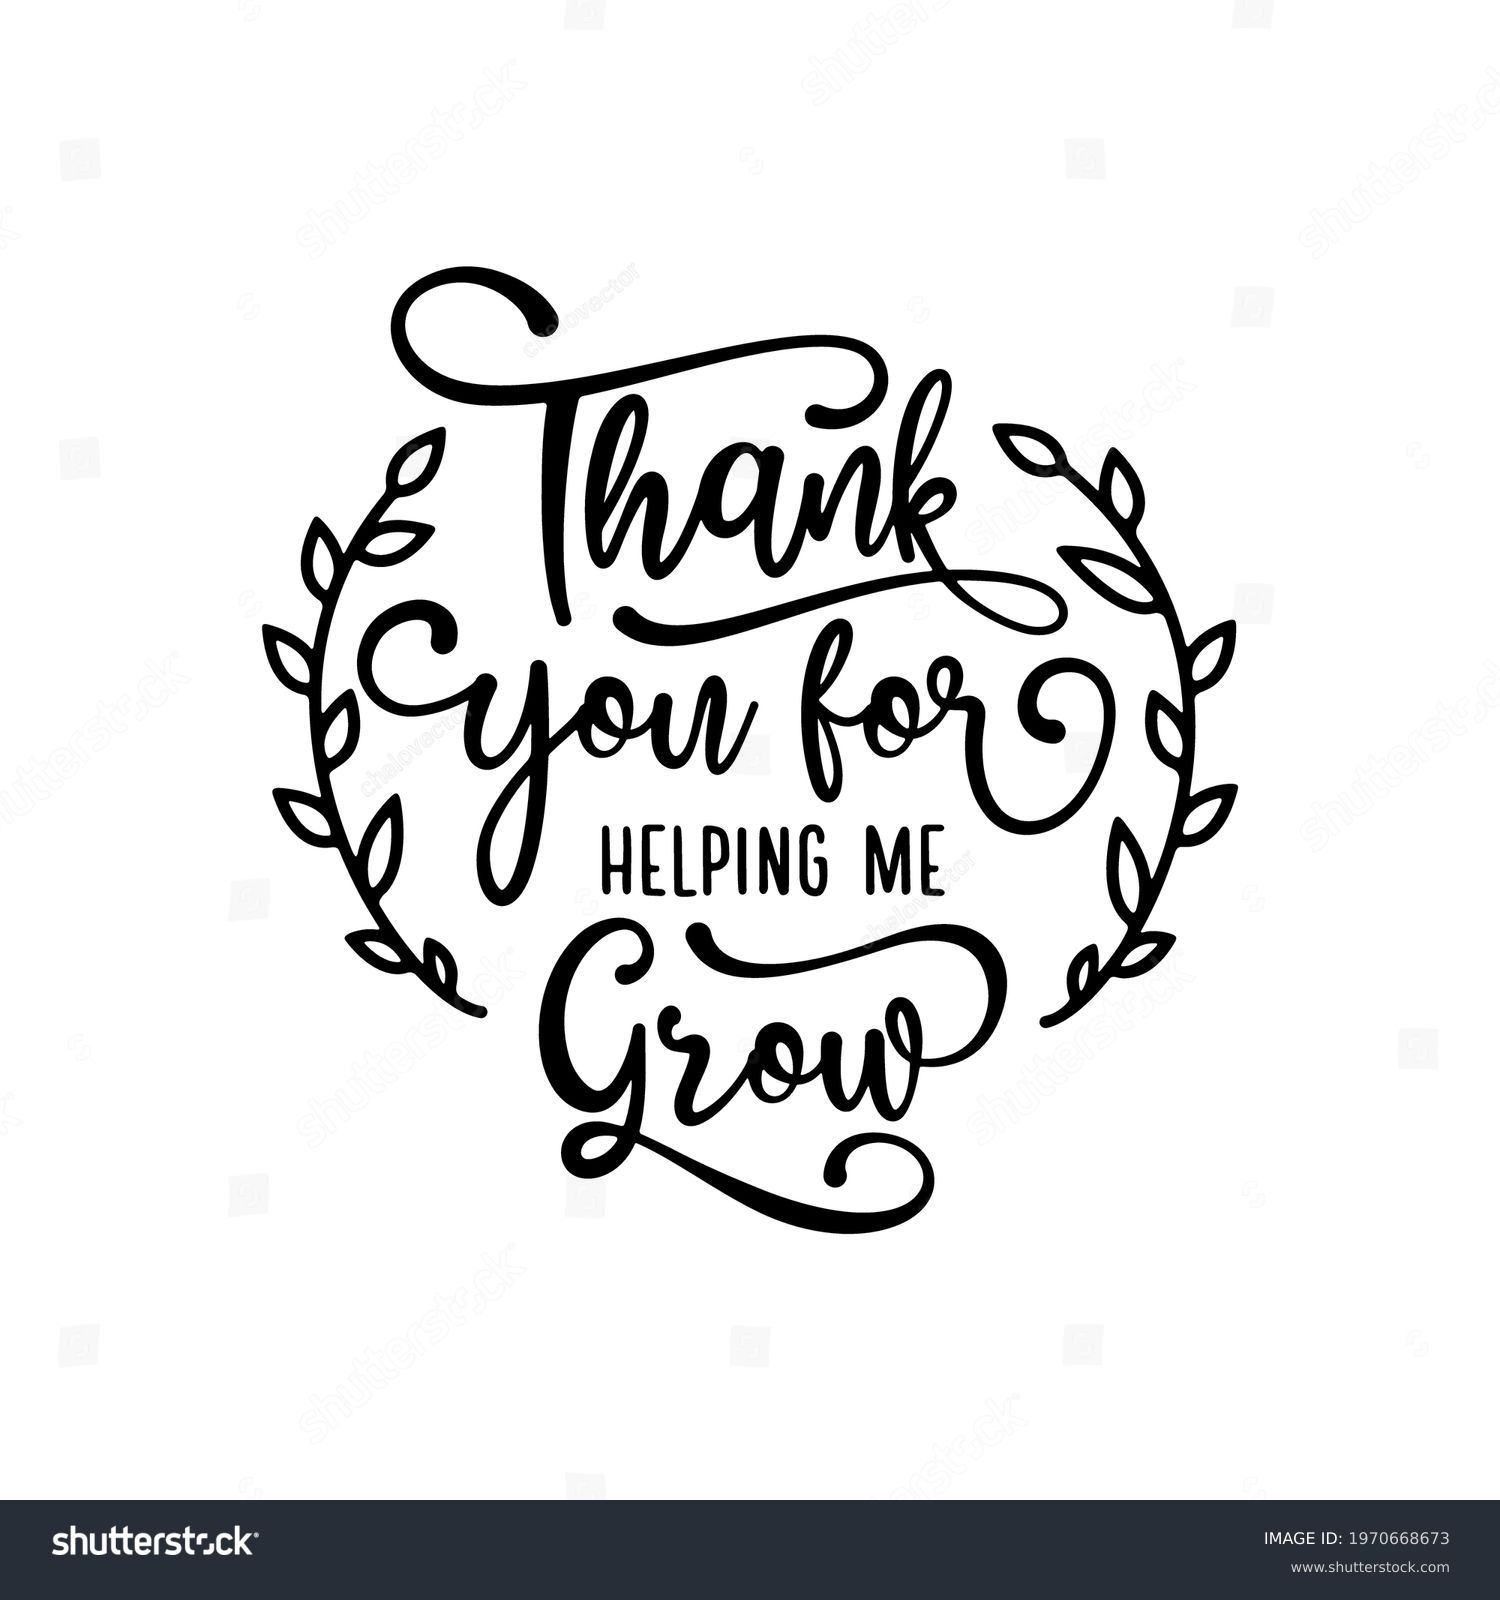 SVG of Teacher gratitude quote modern calligraphy. Thank you for helping me grow text. Vector illustration. svg